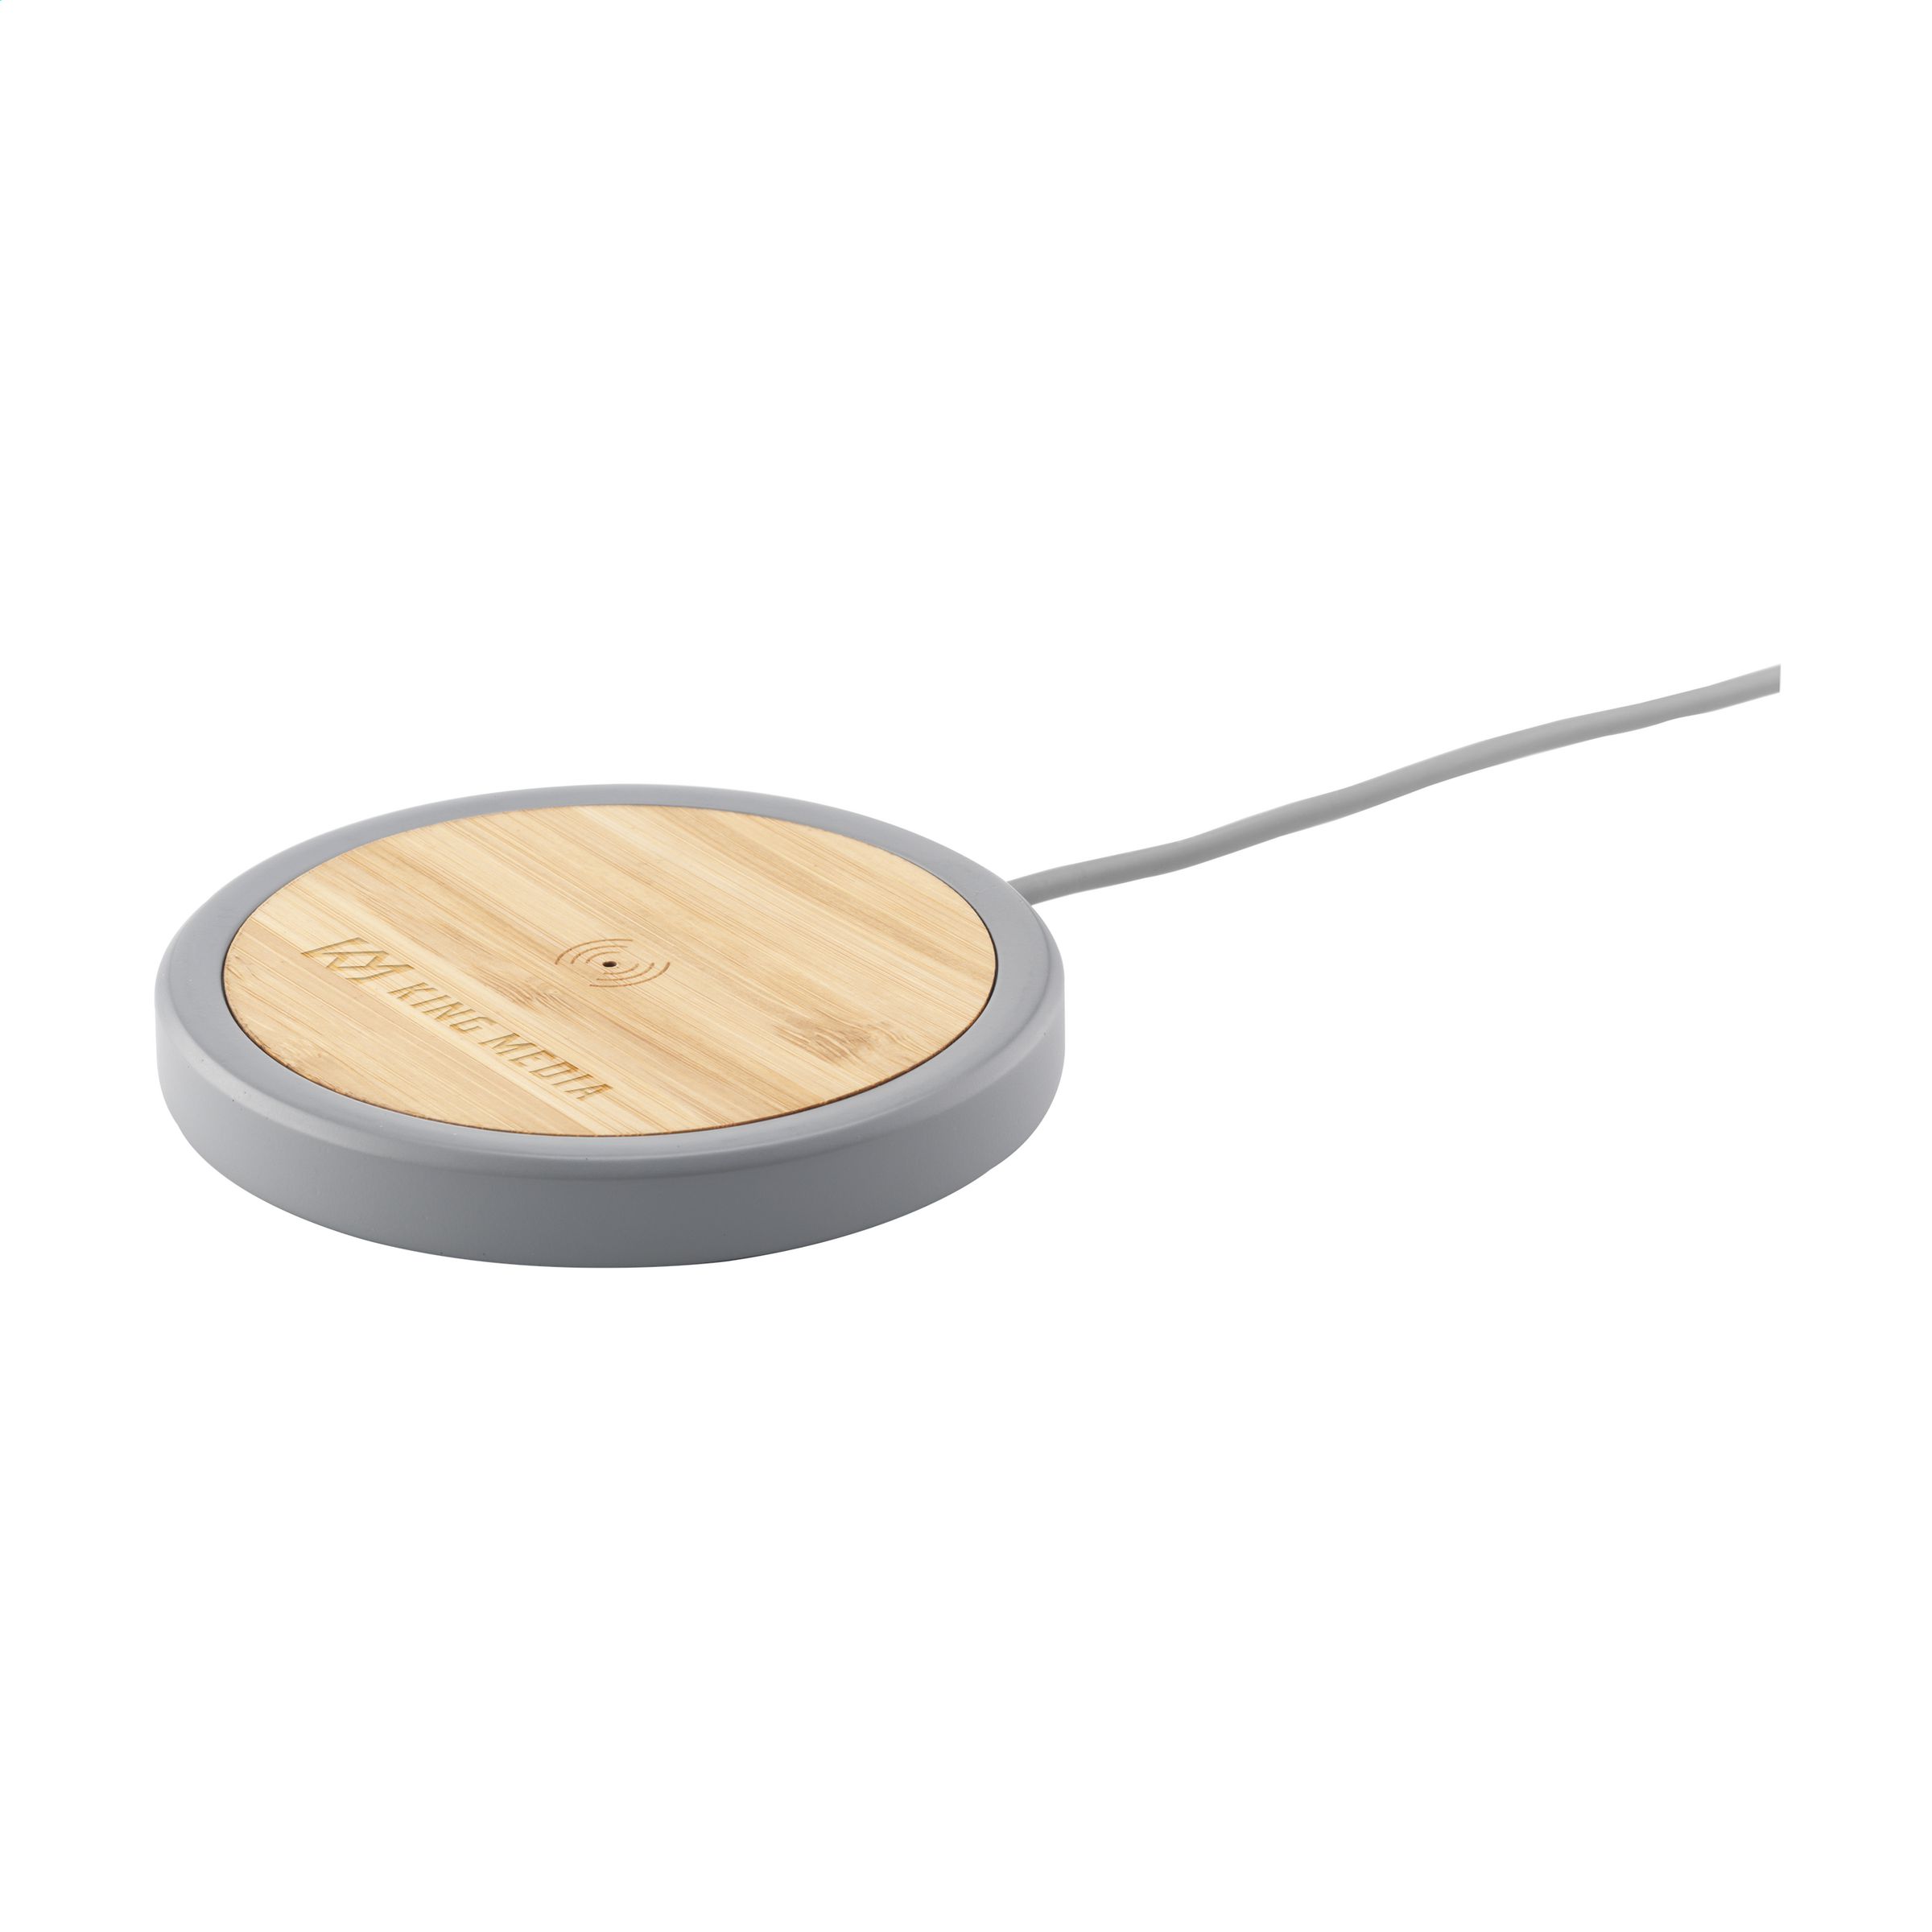 Bamboo Slate Charger - Sphere - Grendon